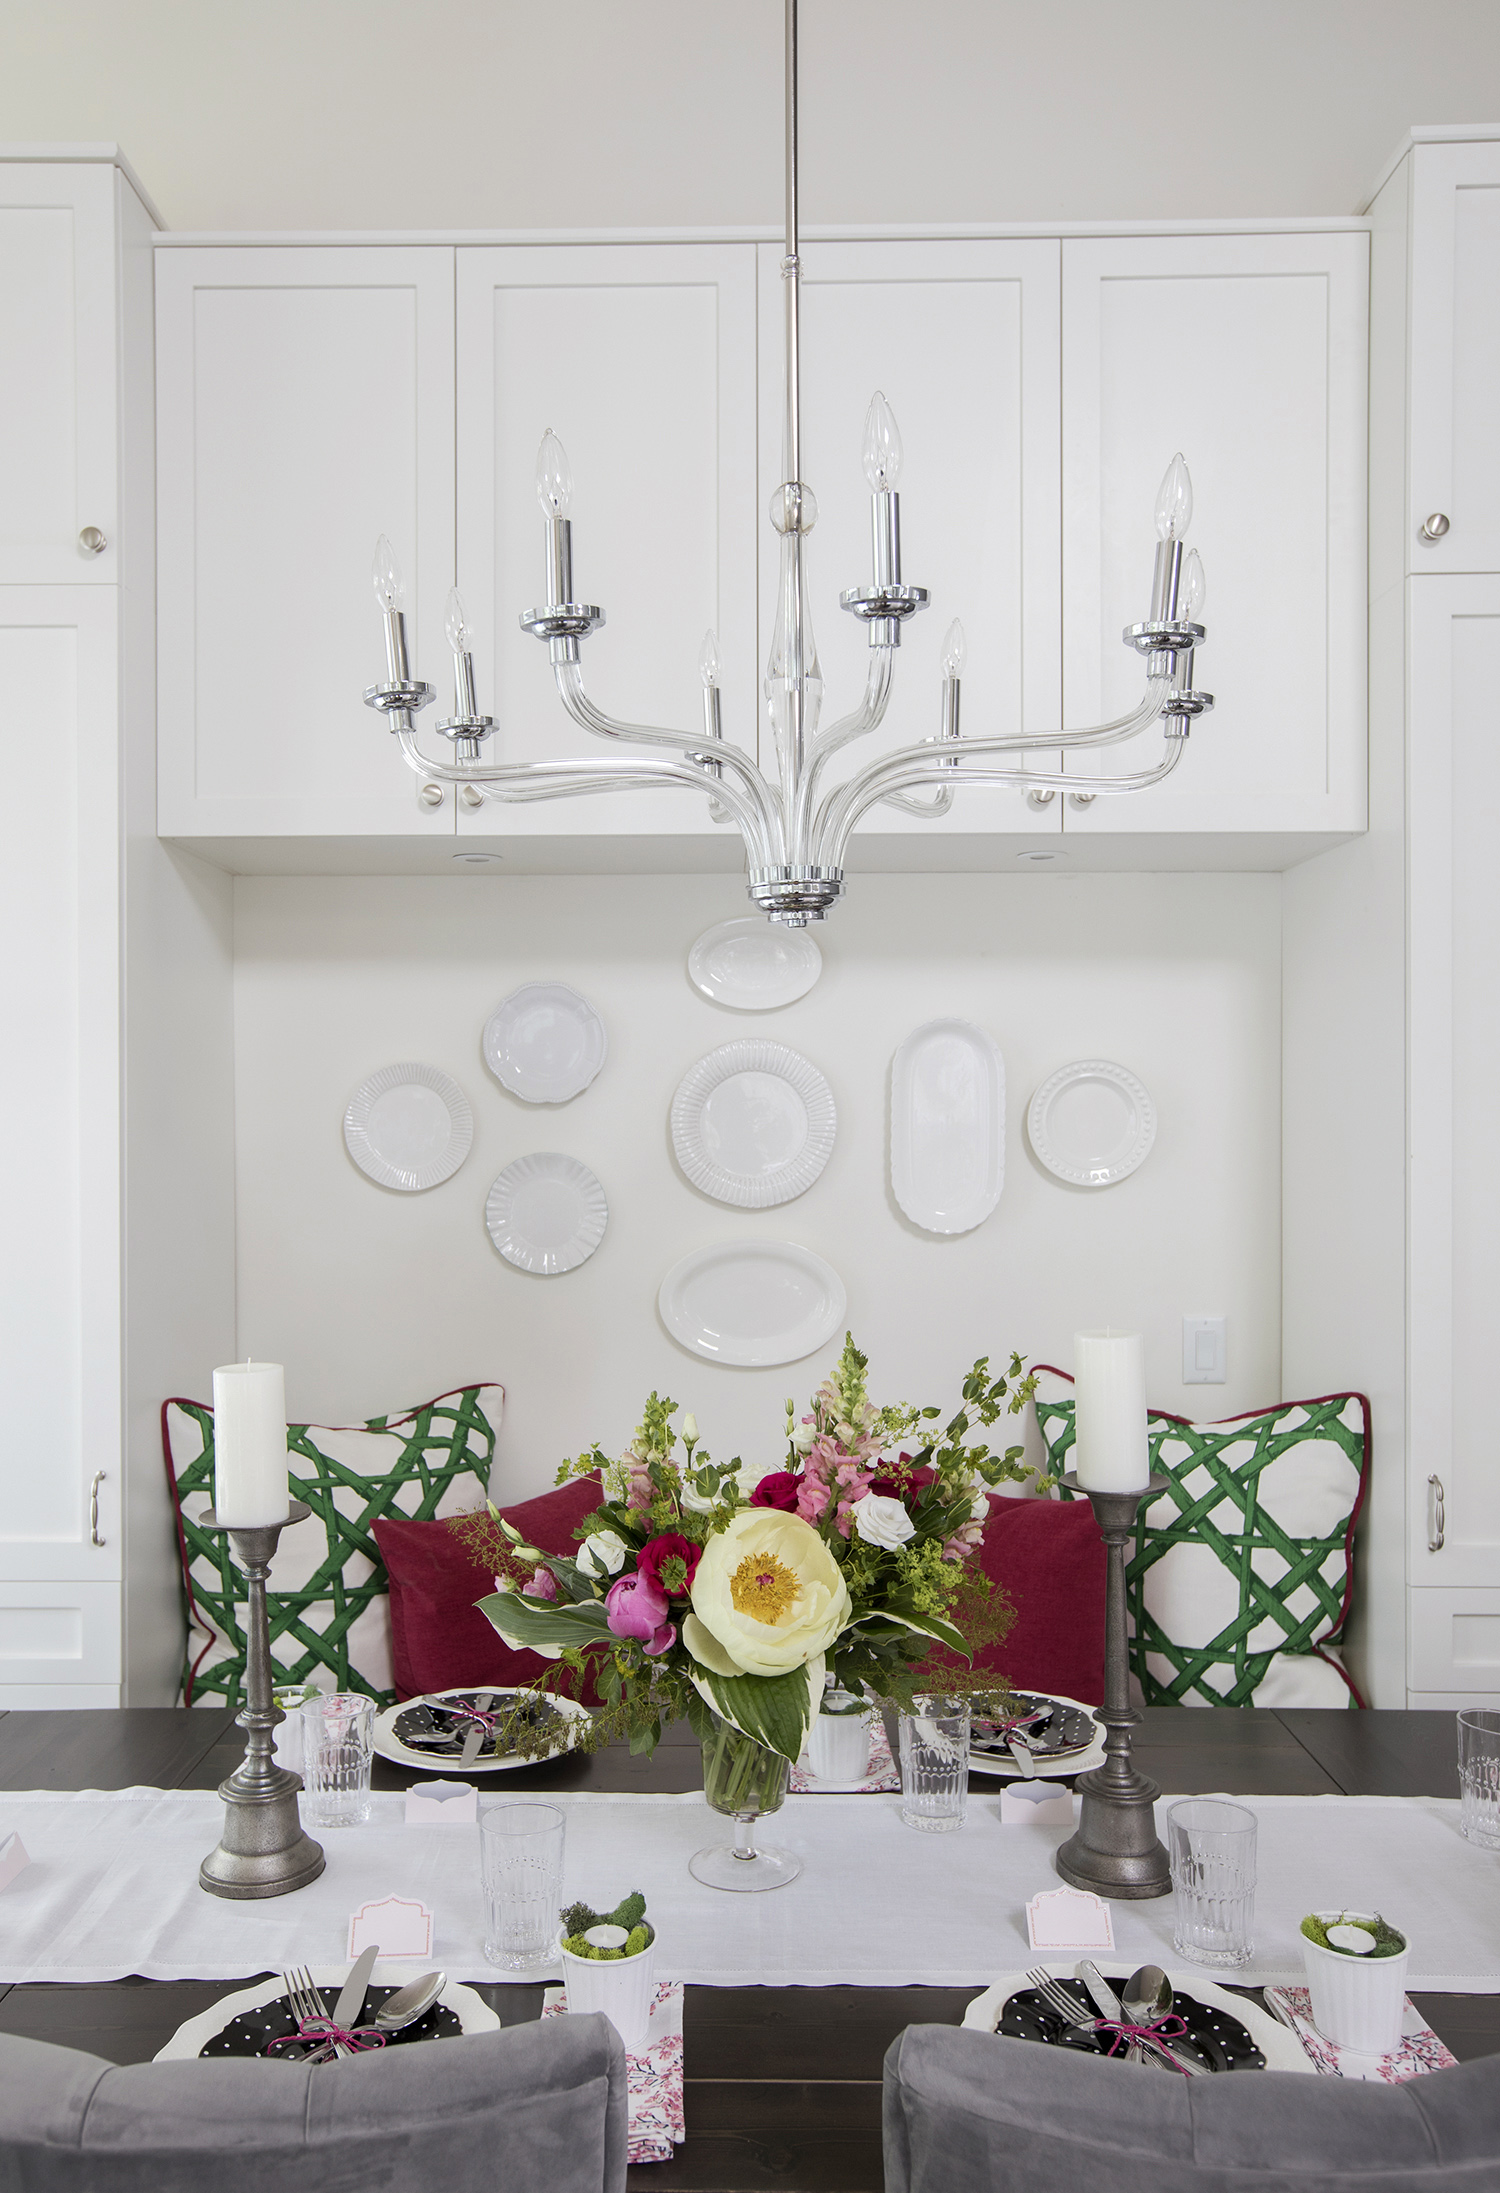 This simple glass chandelier over the dining table is a modern take on a traditional style, continuing the light and airy feel in this now contemporary home.